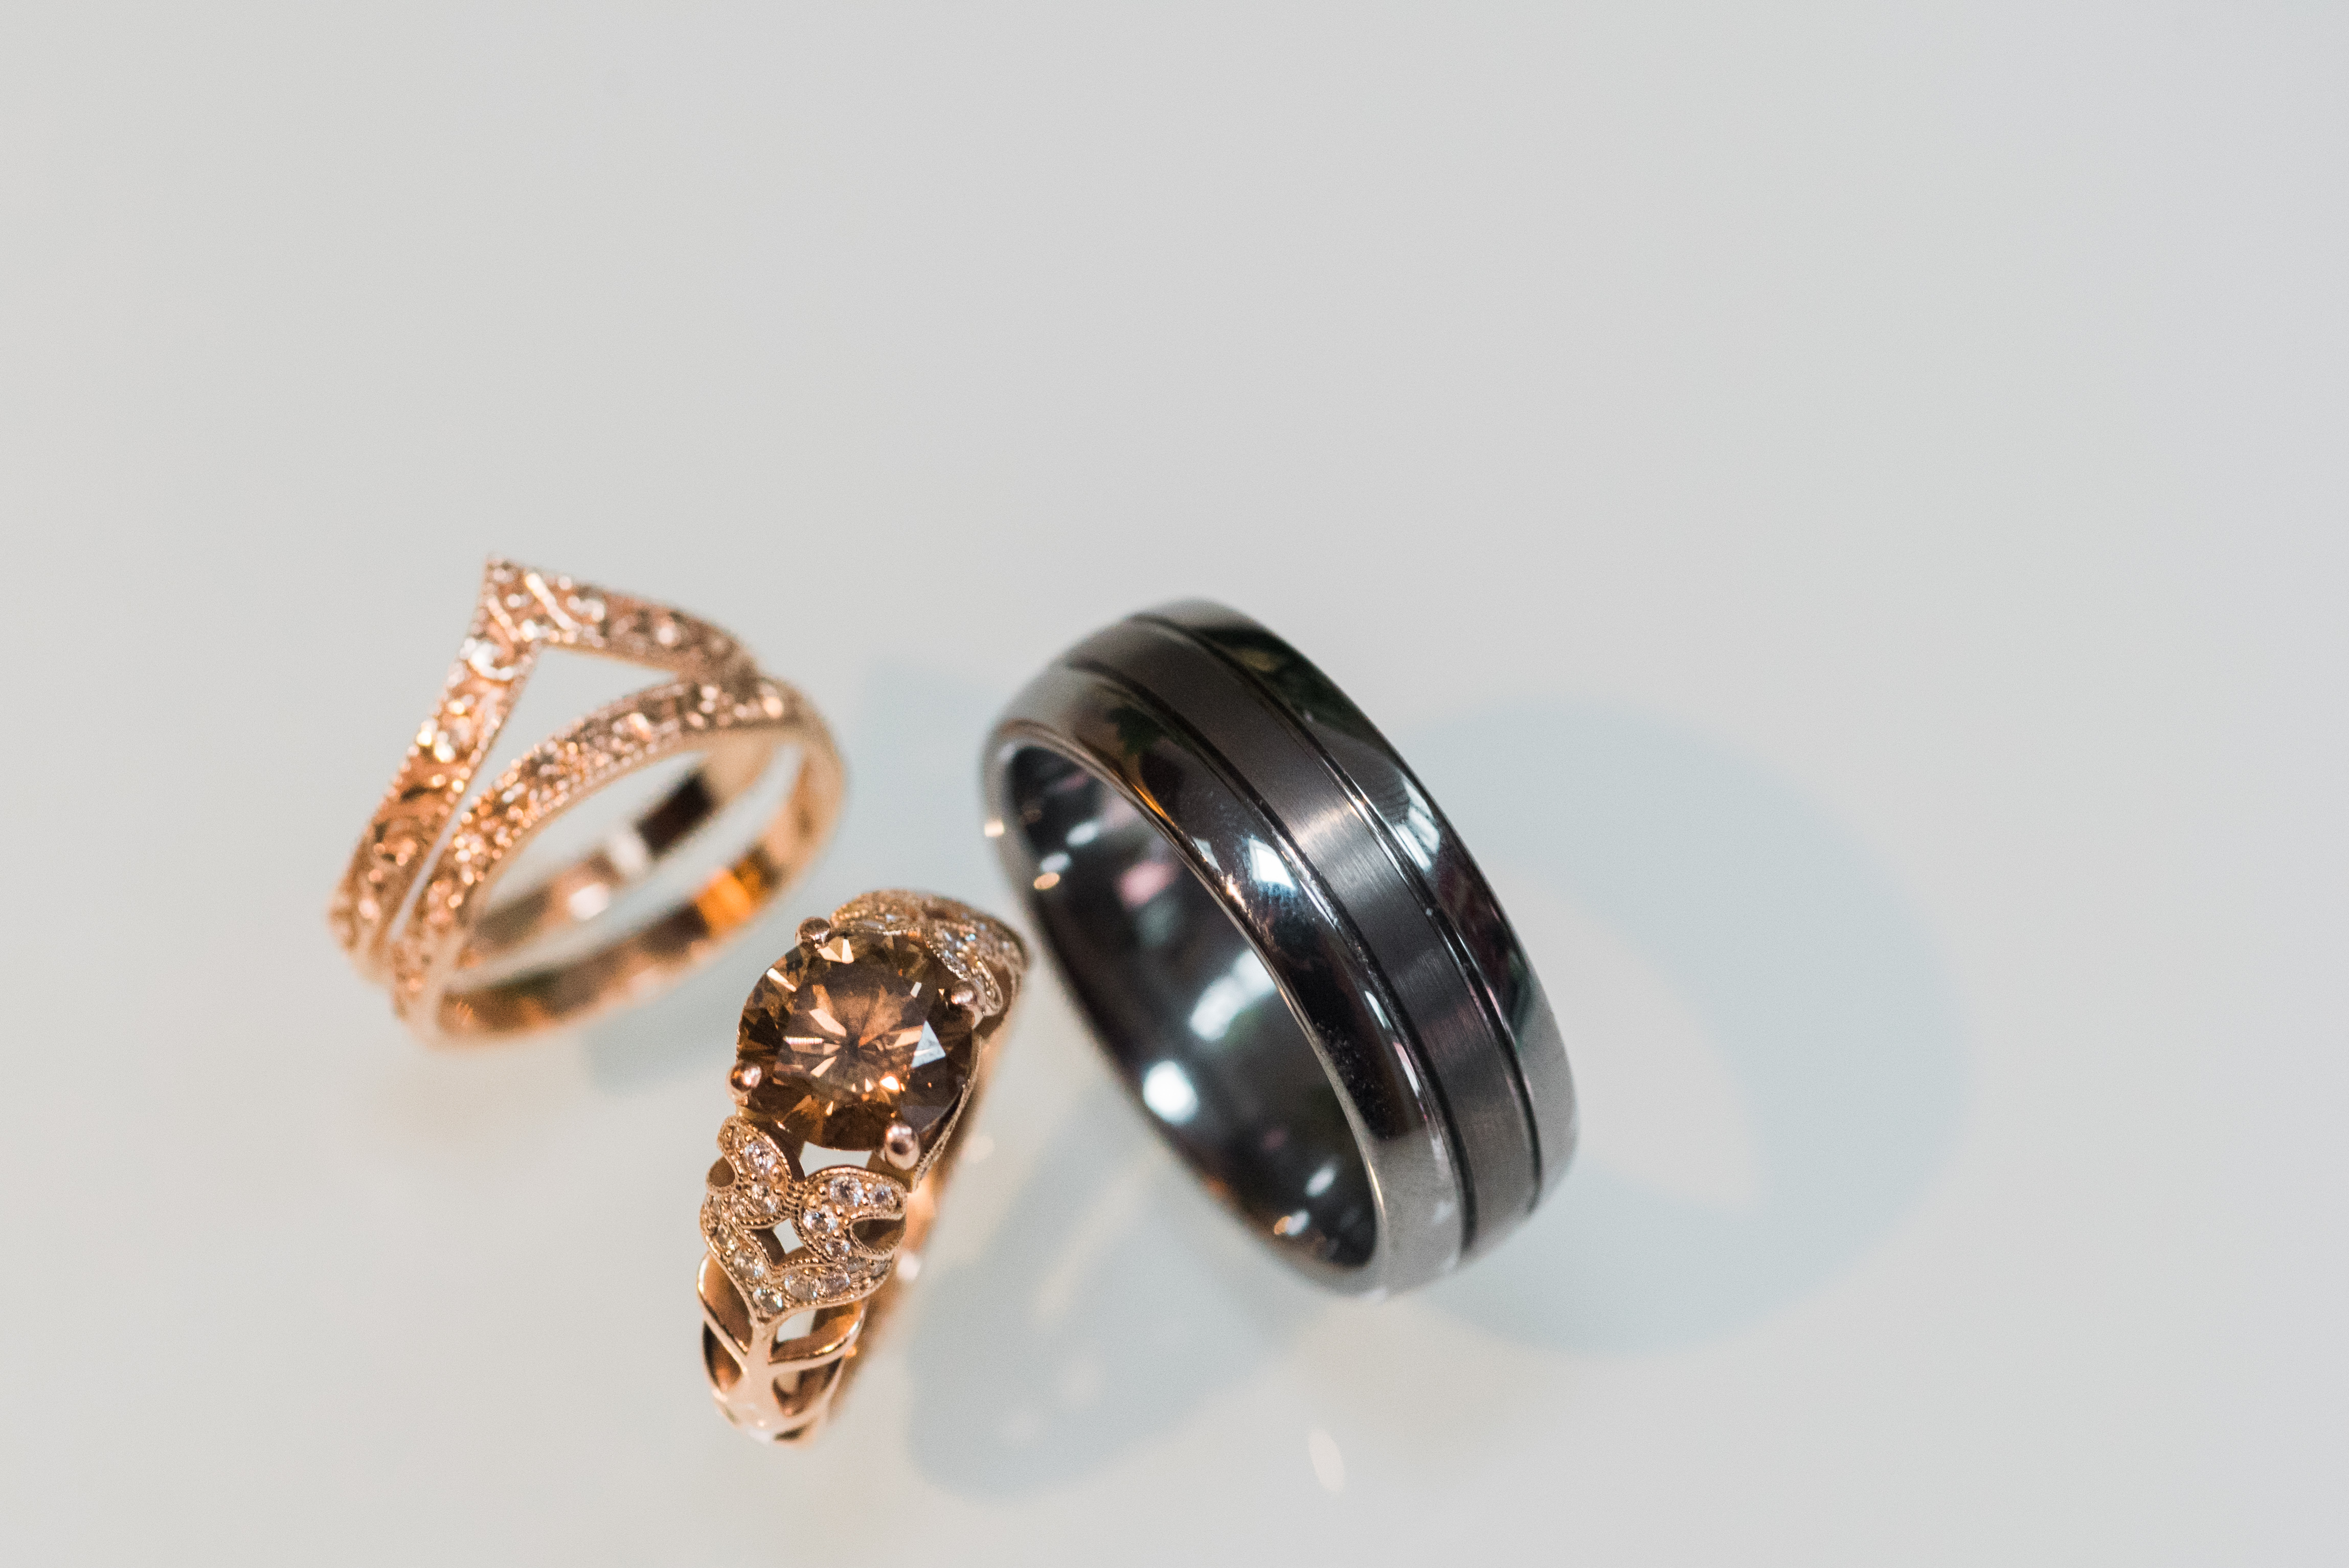 Wedding rings and bands